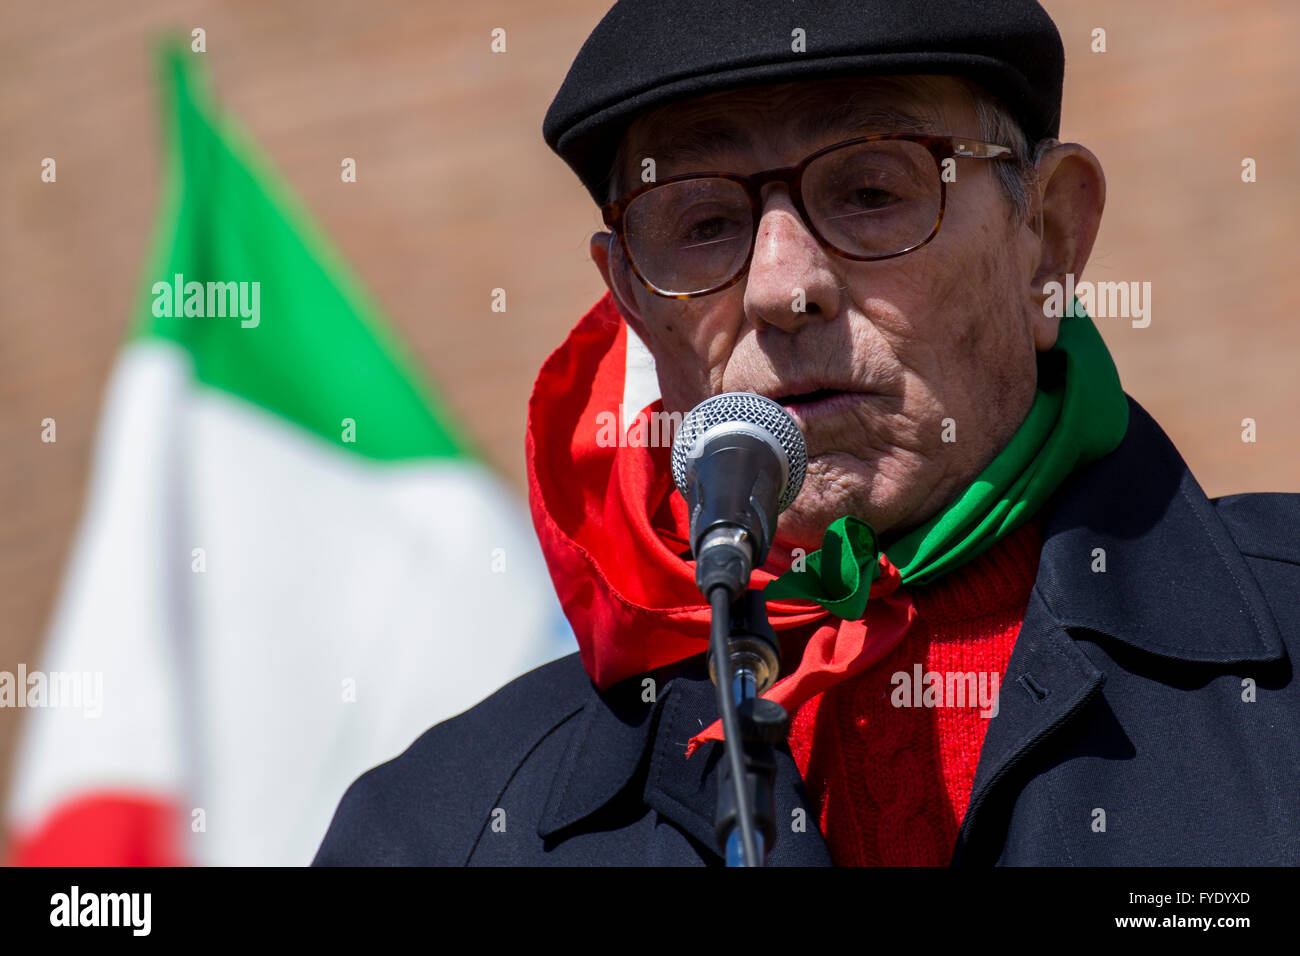 On 25 April Italy celebrates the '71th Festa della Liberazione' which marks the country’s liberation from German occupation and fascist rule at the end of world war two.  The celebration, a parade in Rome from Colosseum to Porta San Paolo, was organized by Anpi 'Associazione nazionale partigiani' Stock Photo